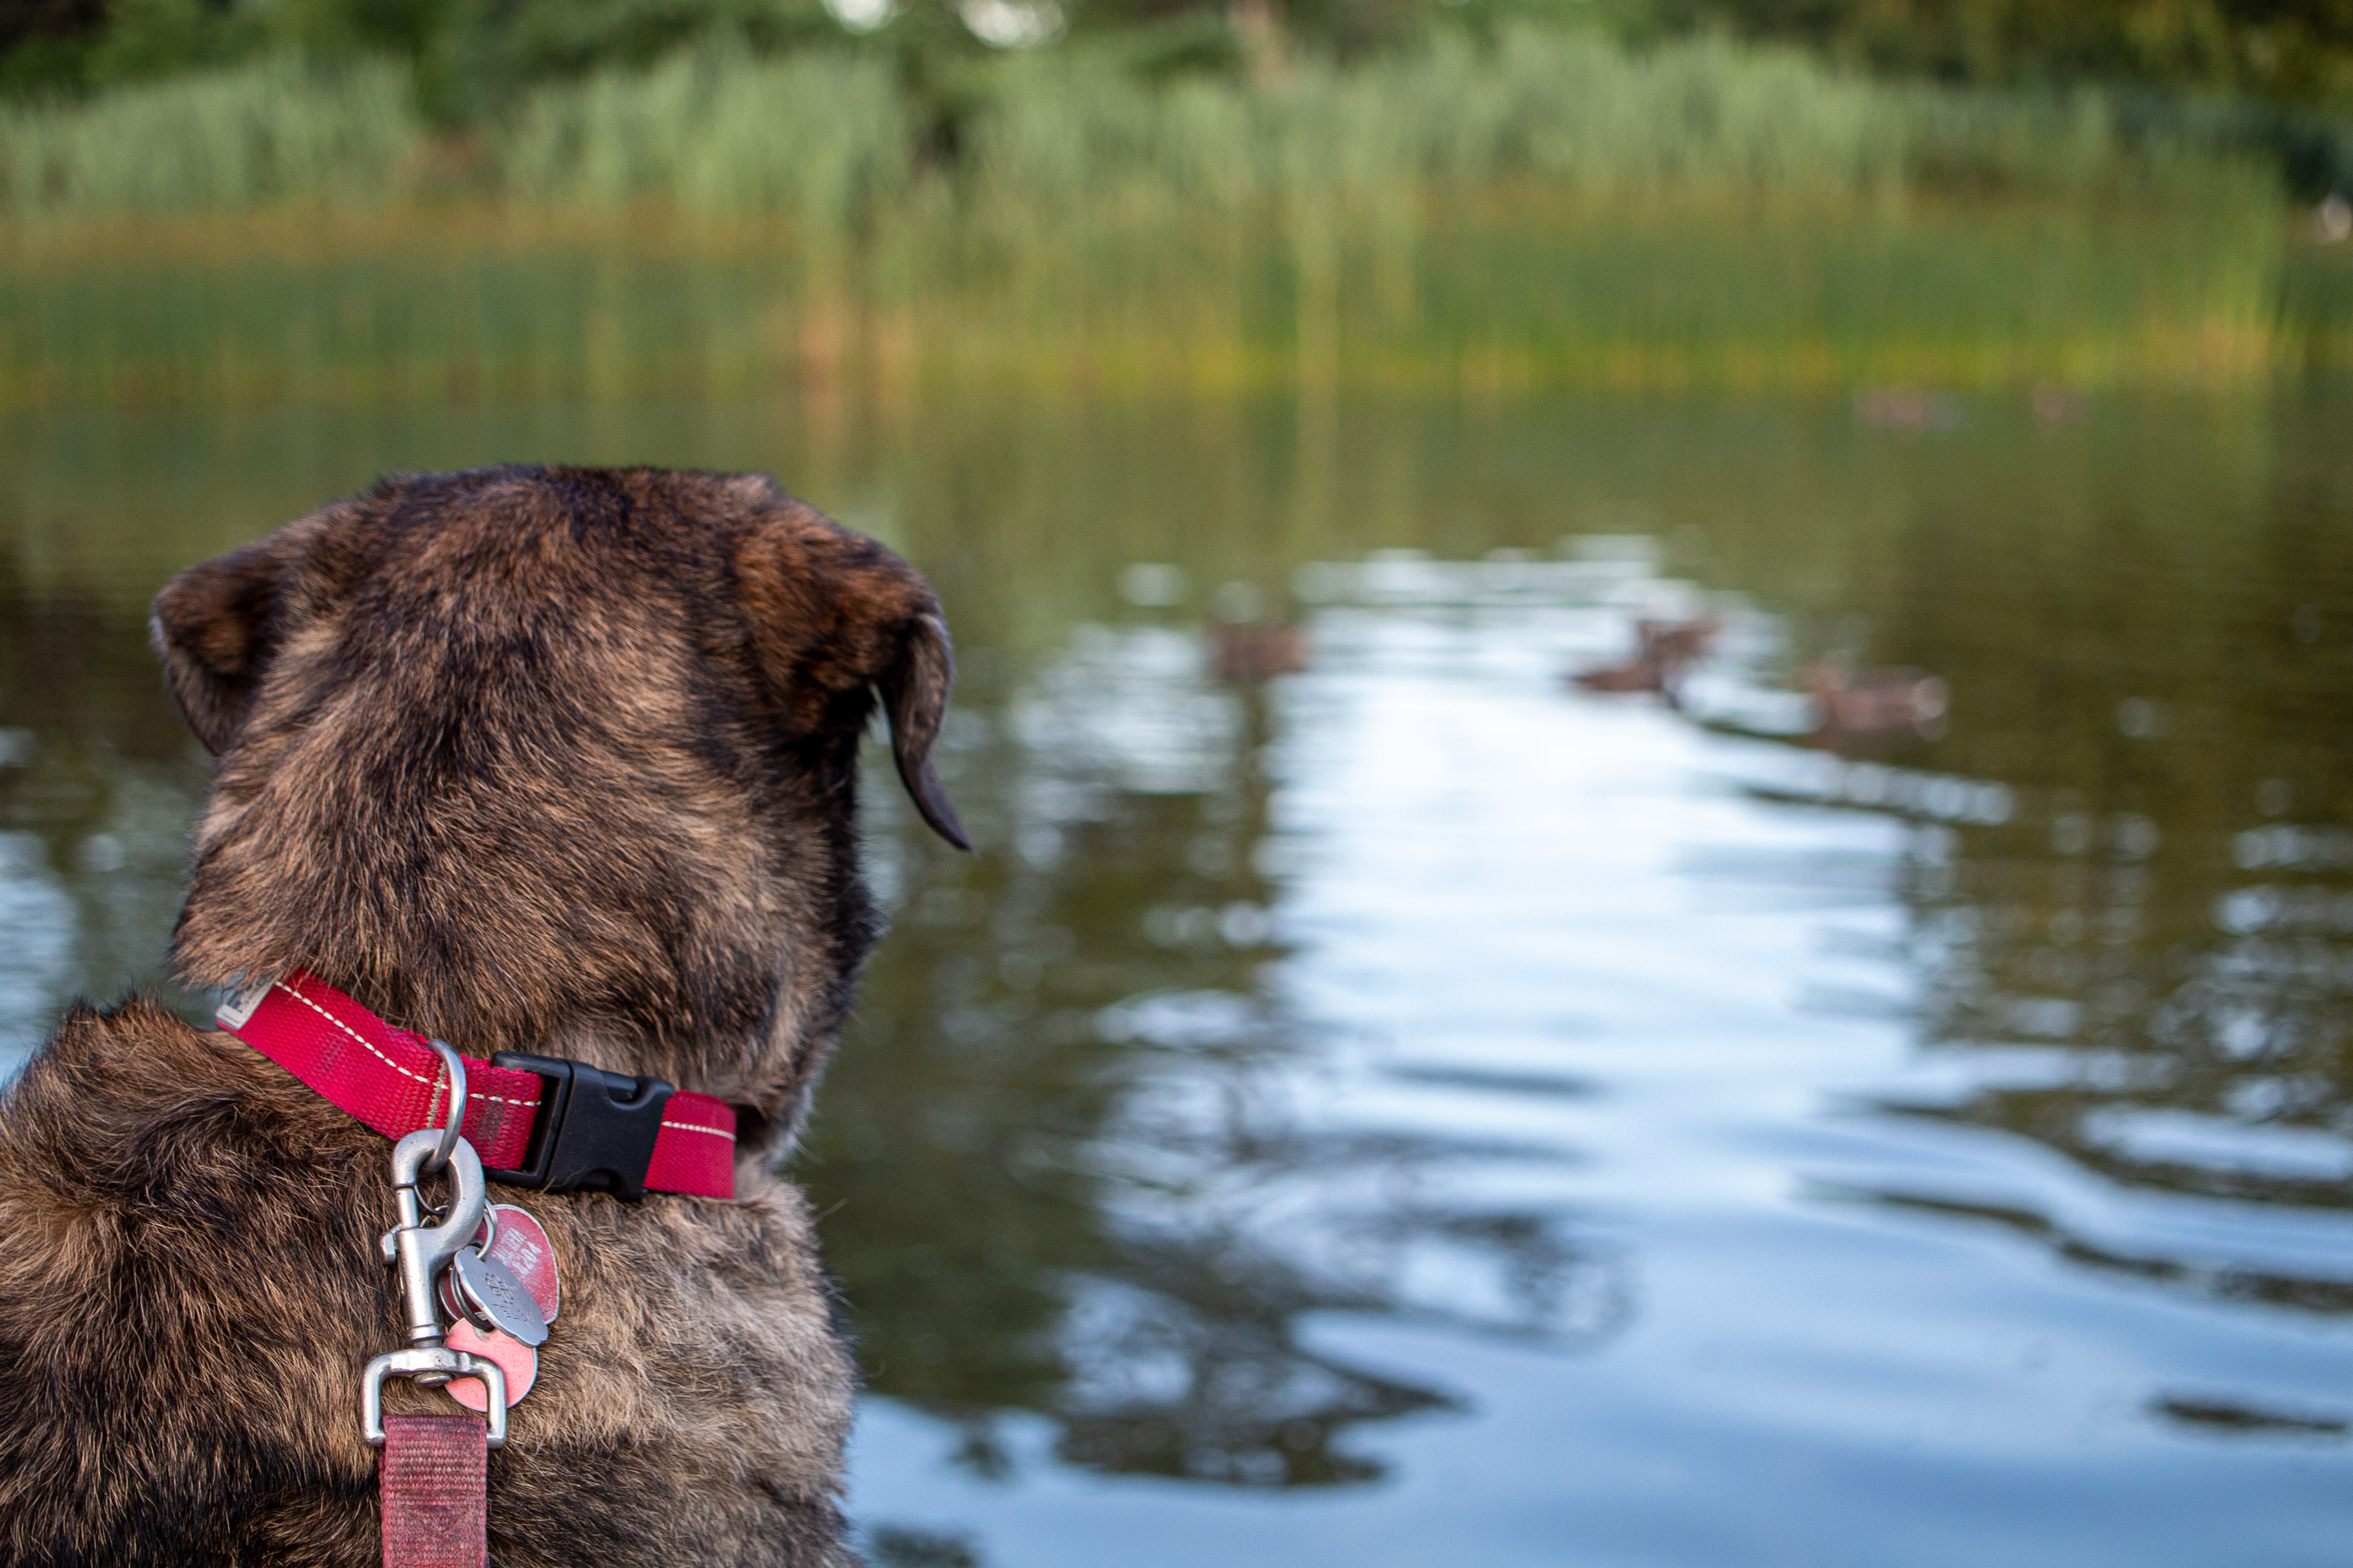 Dog with red leash and collar (in focus) is looking at ducks in the background (out of focus)